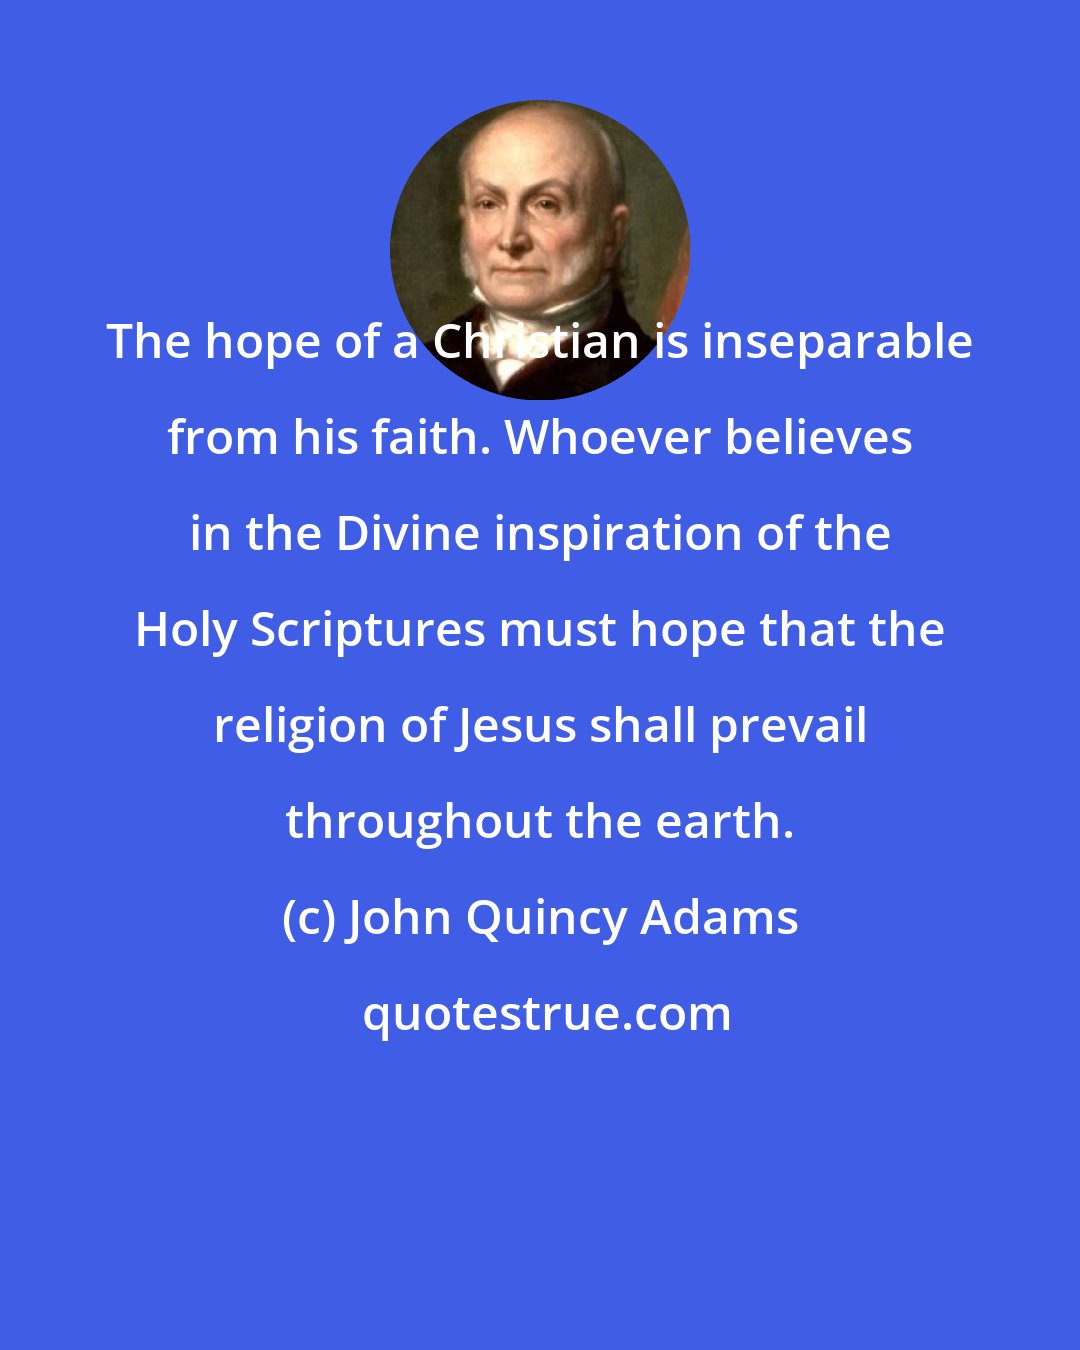 John Quincy Adams: The hope of a Christian is inseparable from his faith. Whoever believes in the Divine inspiration of the Holy Scriptures must hope that the religion of Jesus shall prevail throughout the earth.